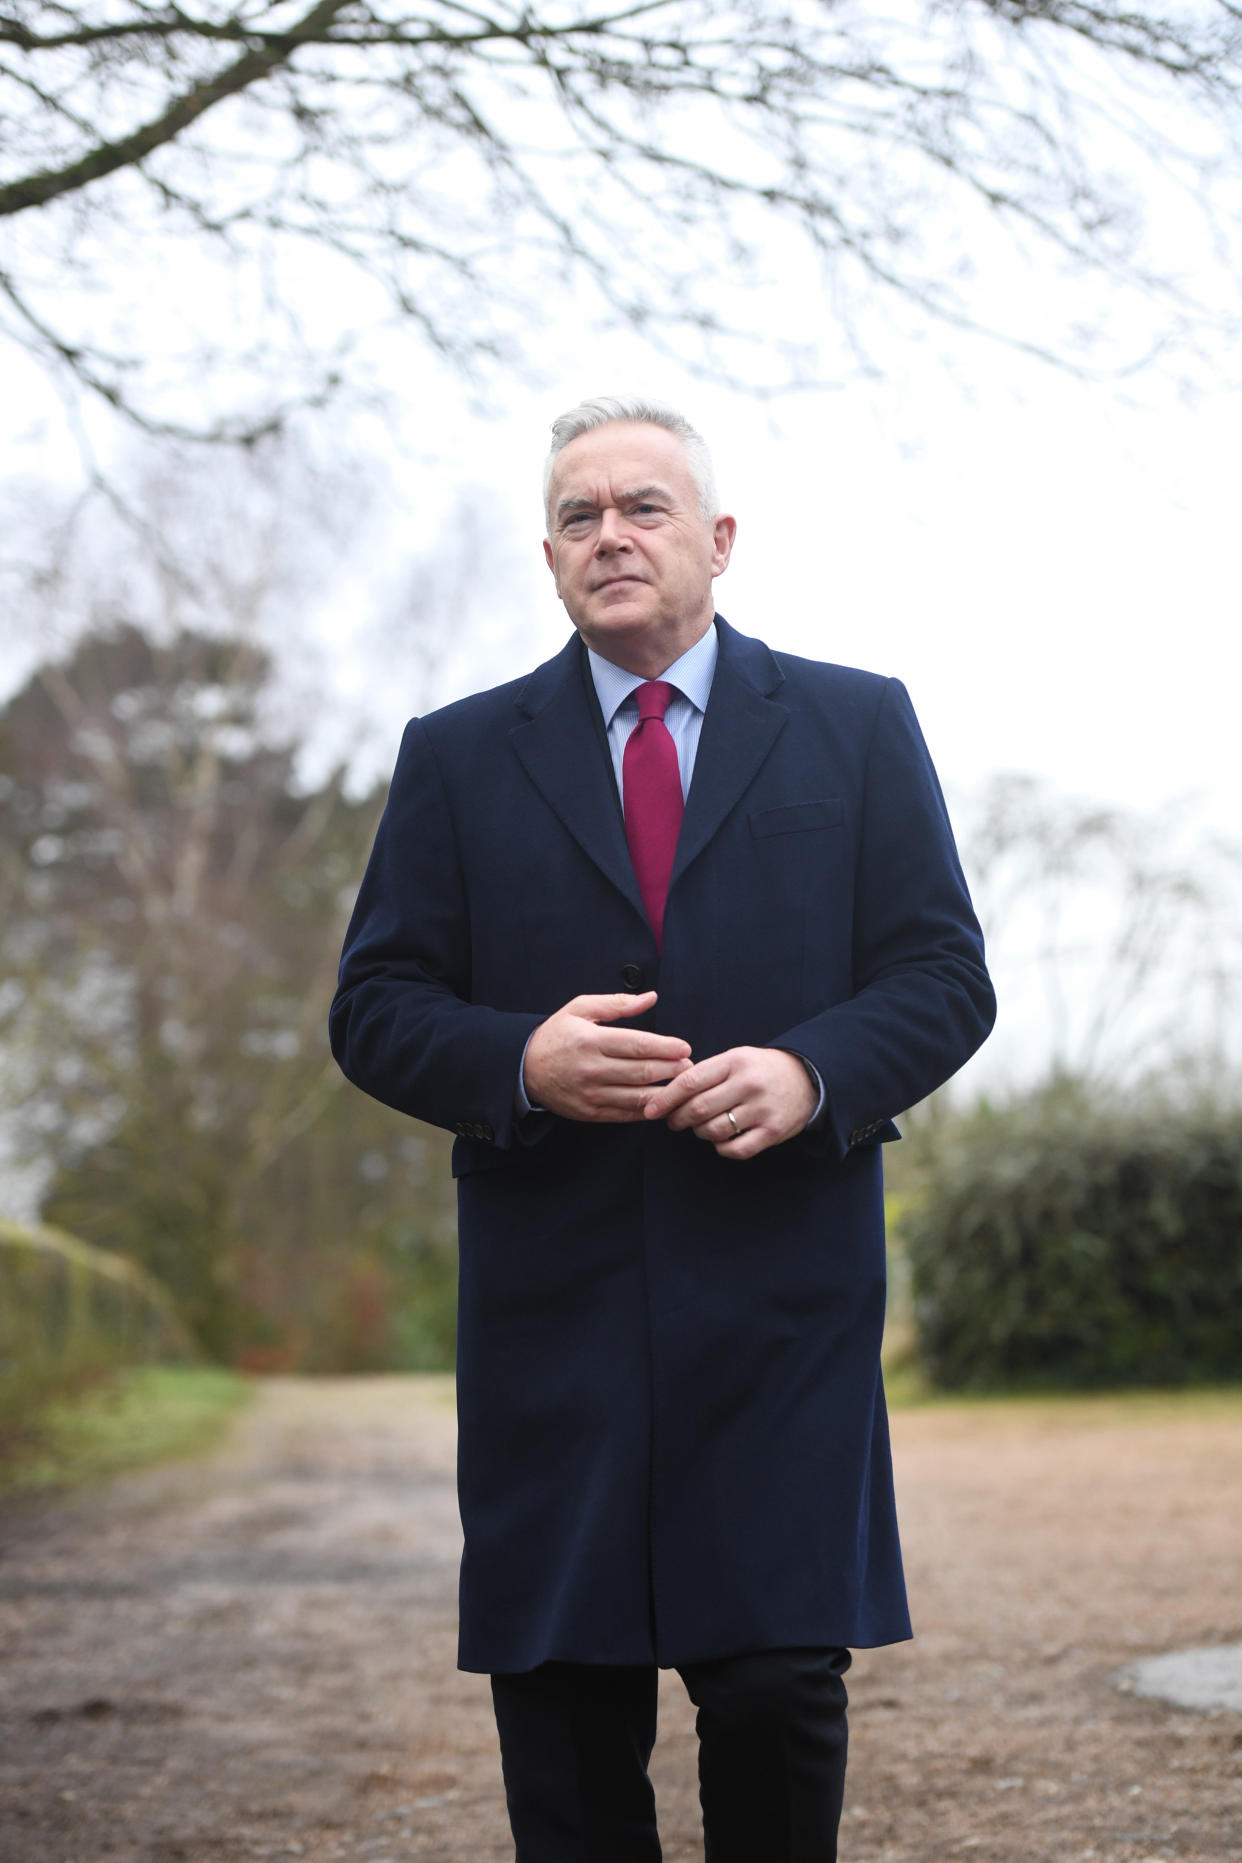 Presenter and newsreader Huw Edwards arrives for his guest appearance at Sandringham Women&#39;s Institute (WI) meeting at West Newton Village Hall, Norfolk, which is also due to be attended by Queen Elizabeth II. PA Photo. Picture date: Thursday January 23, 2020. Photo credit should read: Joe Giddens/PA Wire